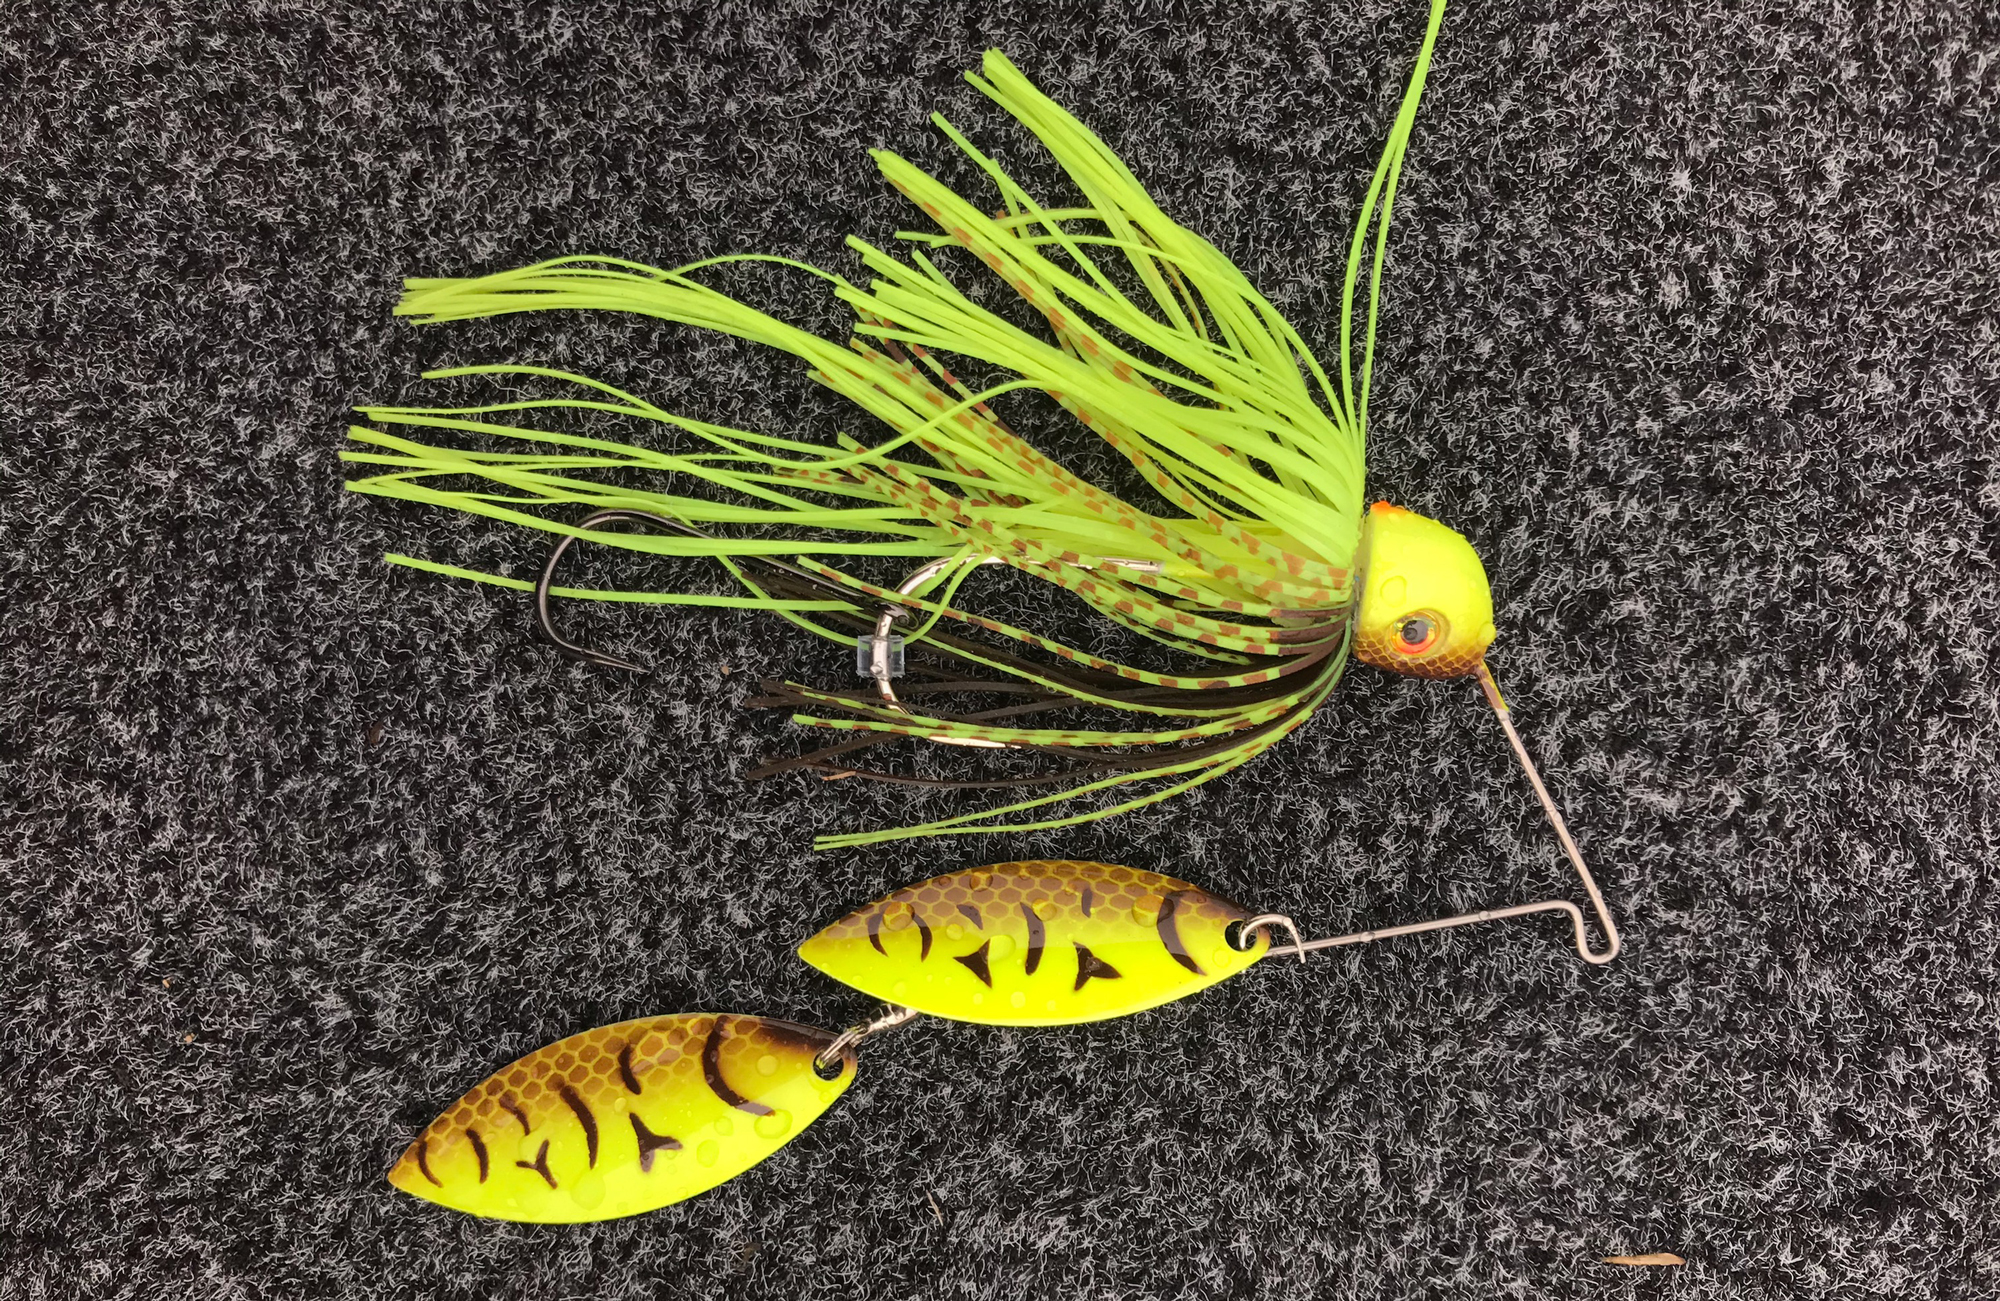 STRIKE KING SPINNERBAITS Lot Of 3 Different Bass Fishing Lures 